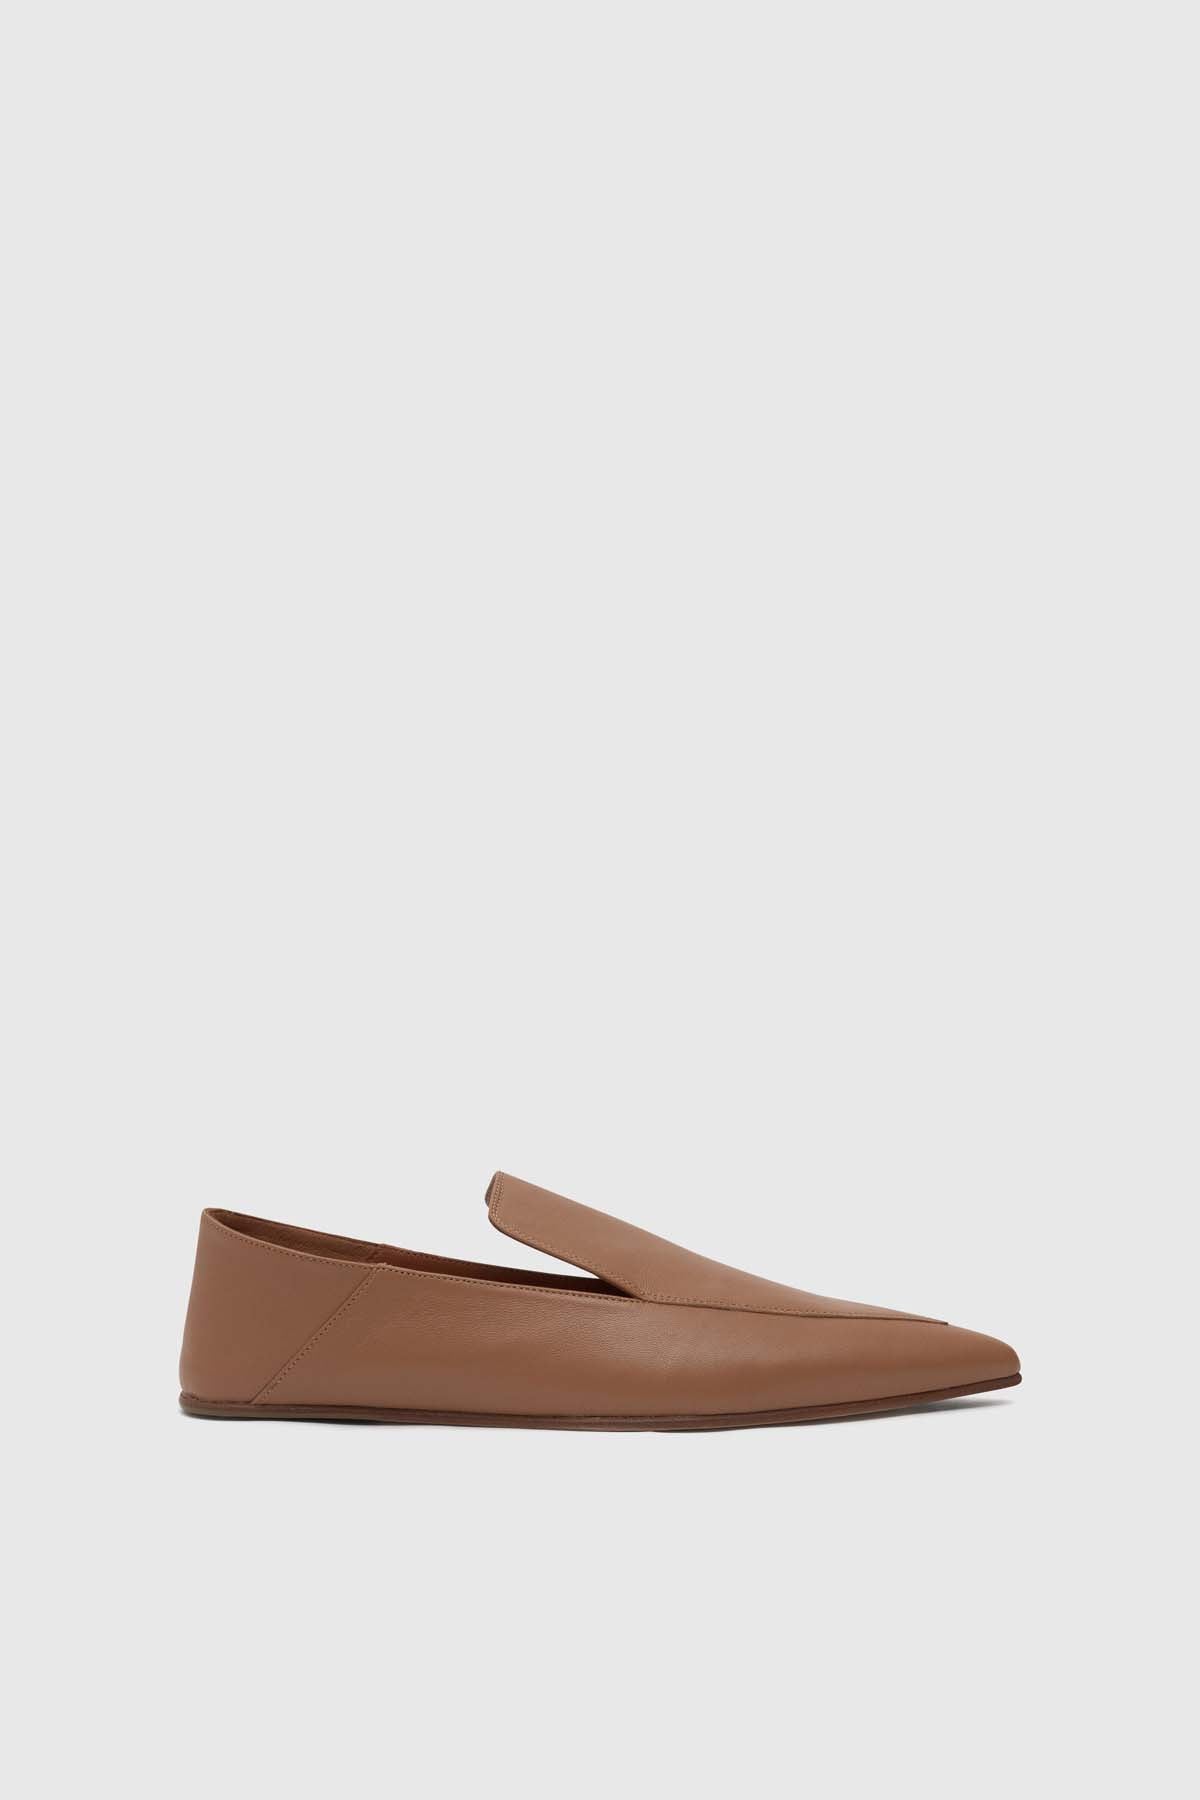 Kai Leather Loafer - Beige